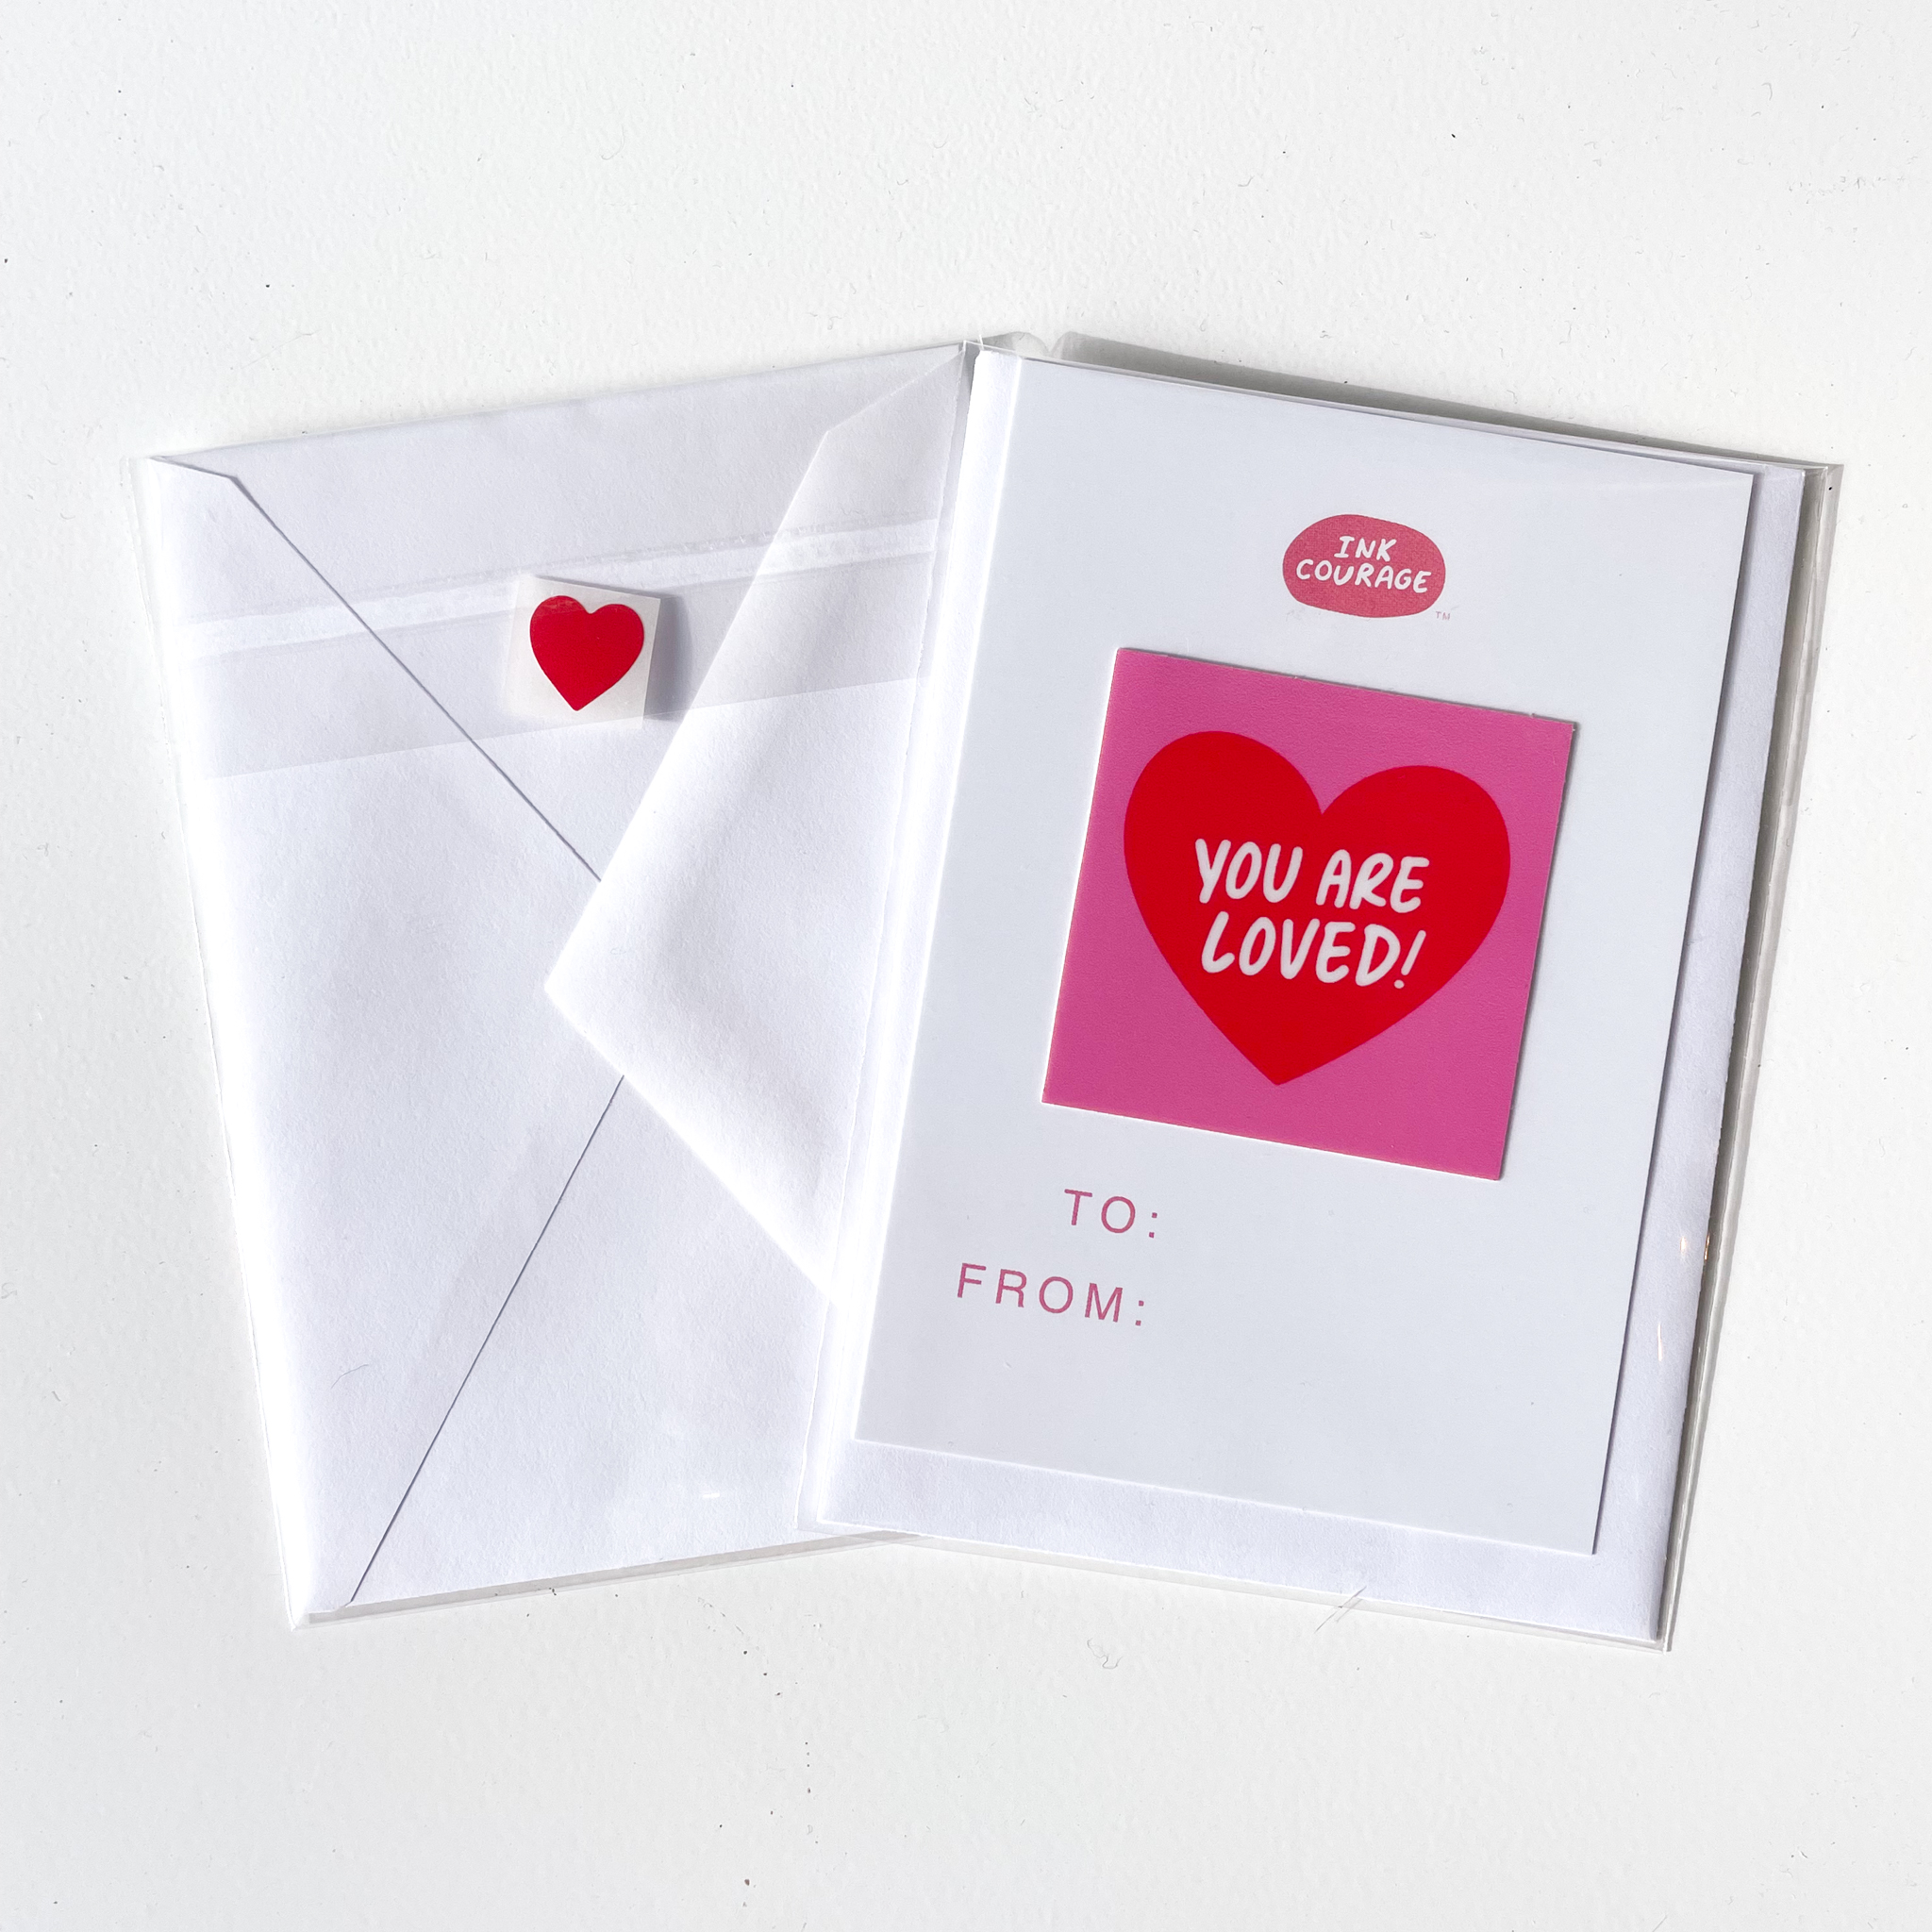 Valentine's Day cards from Inkcourage